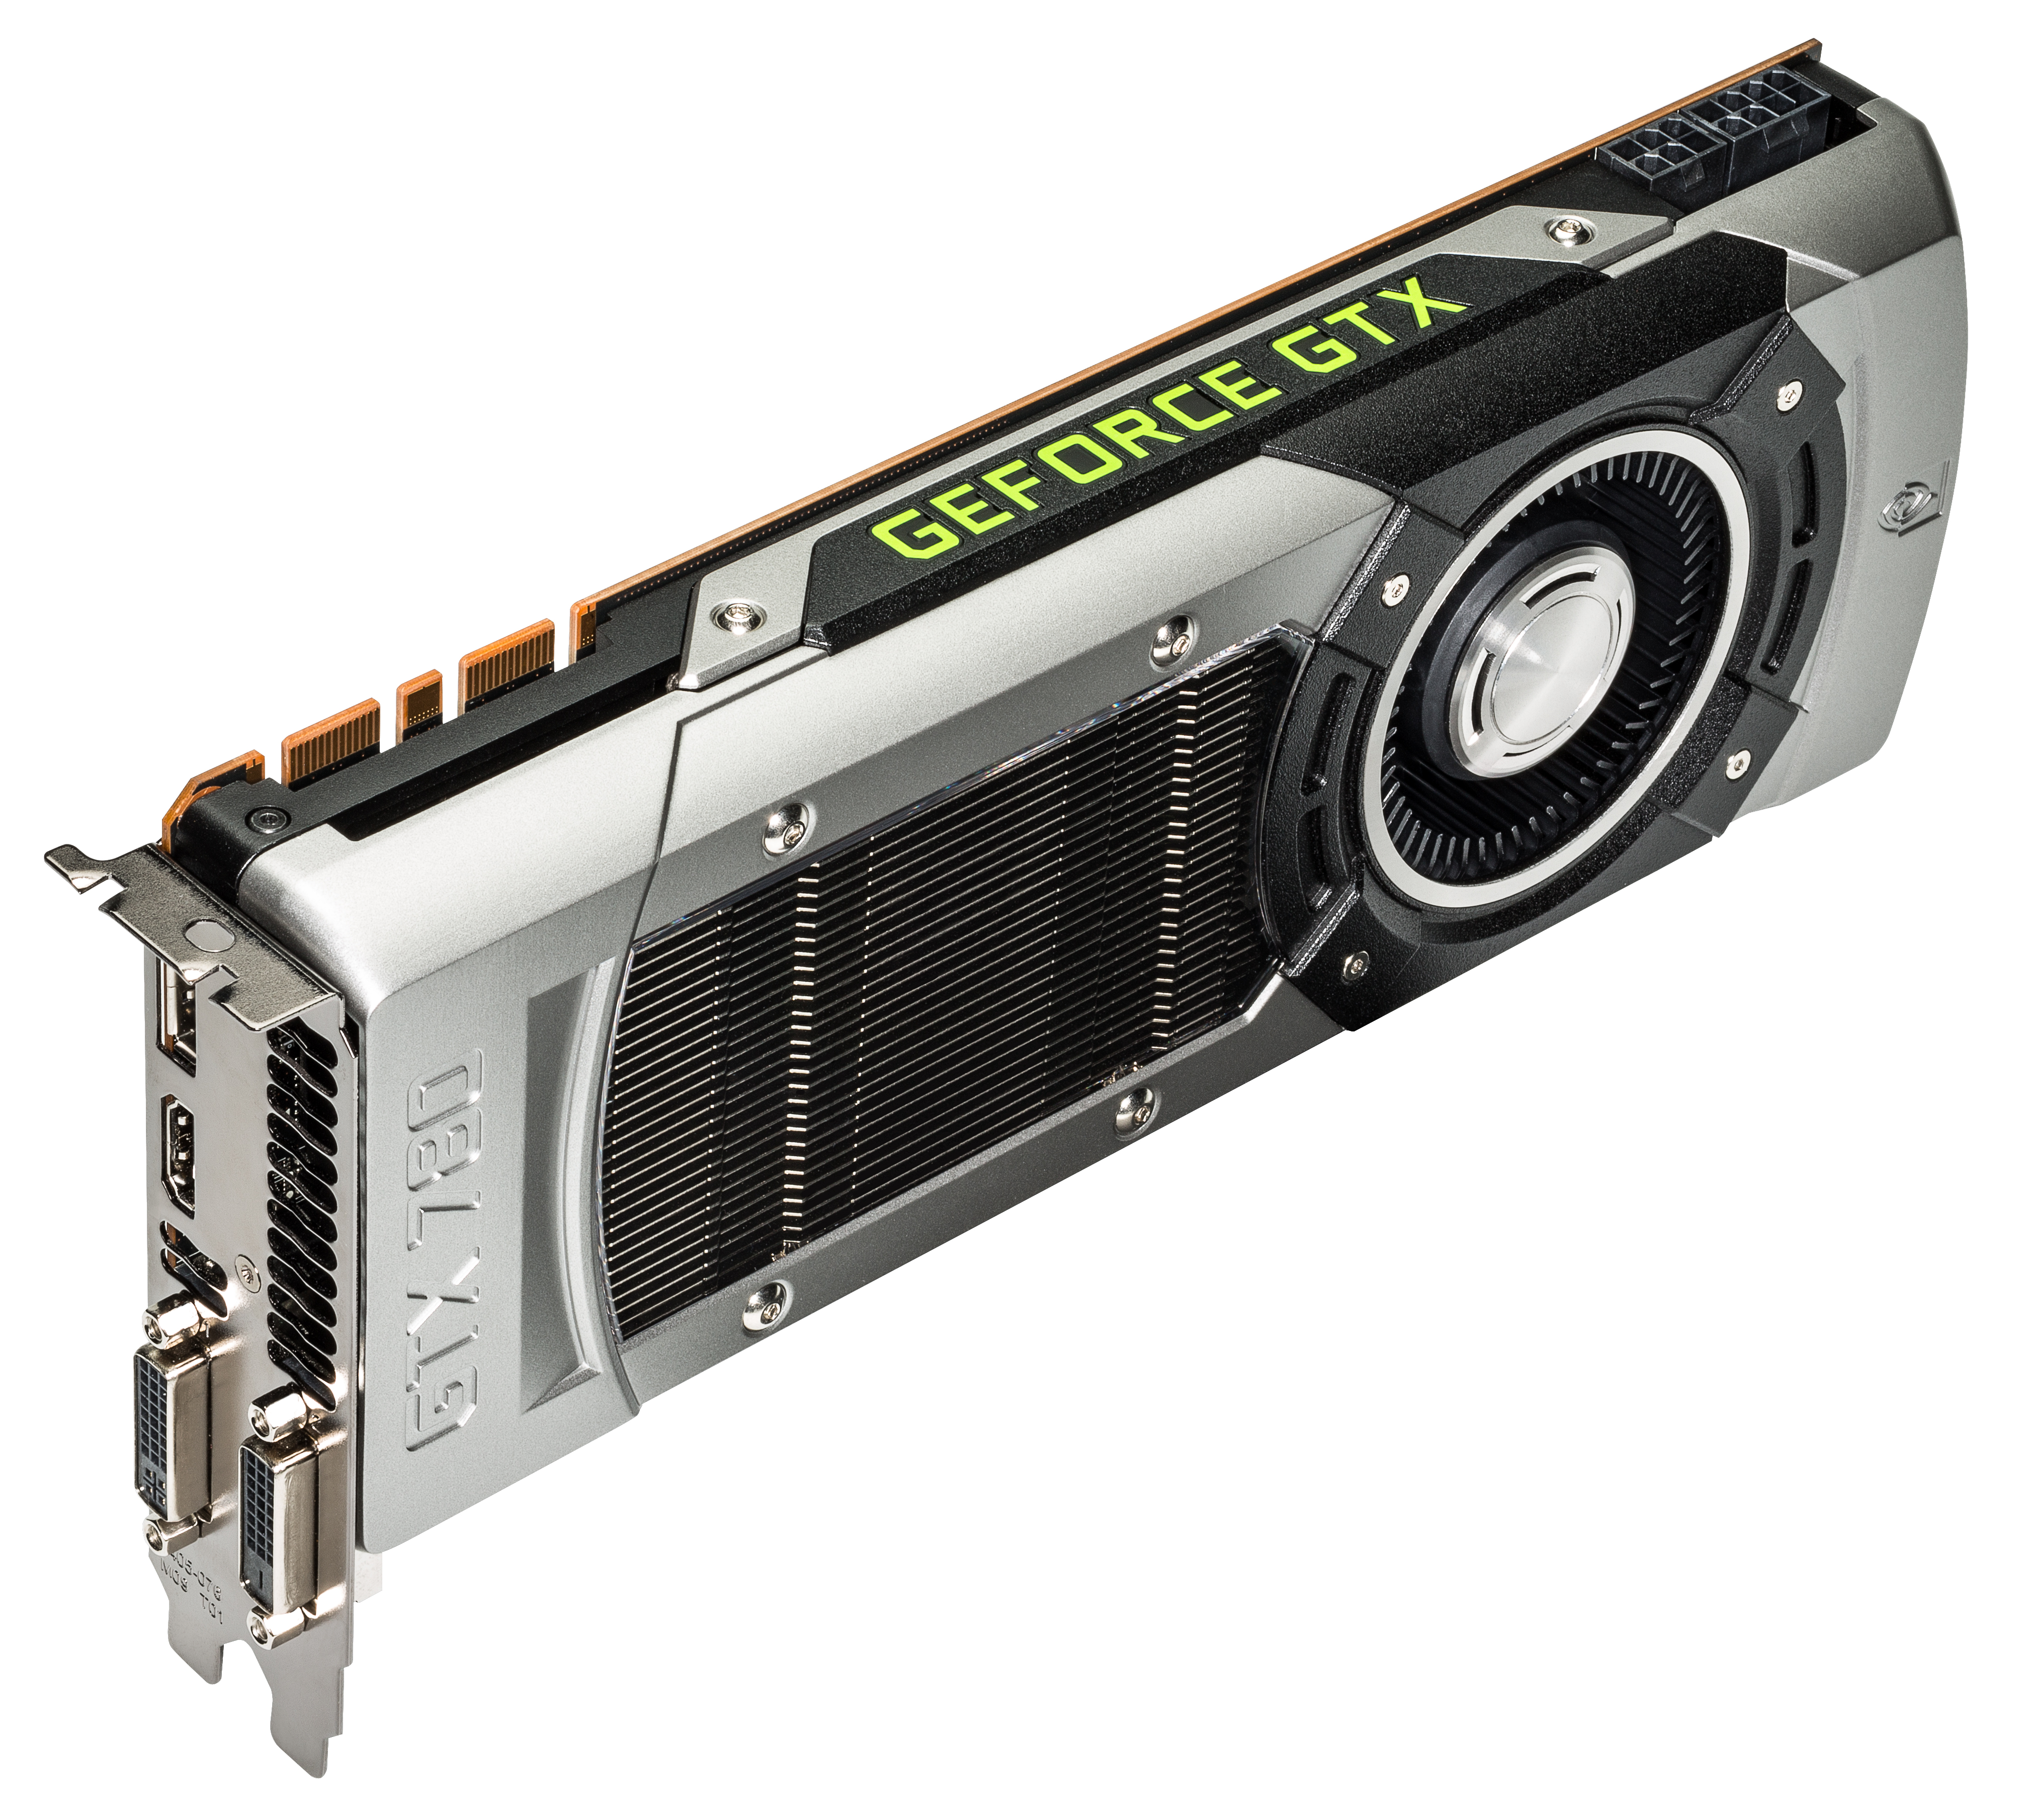 Nvidia Geforce Gtx 780 Review The New High End